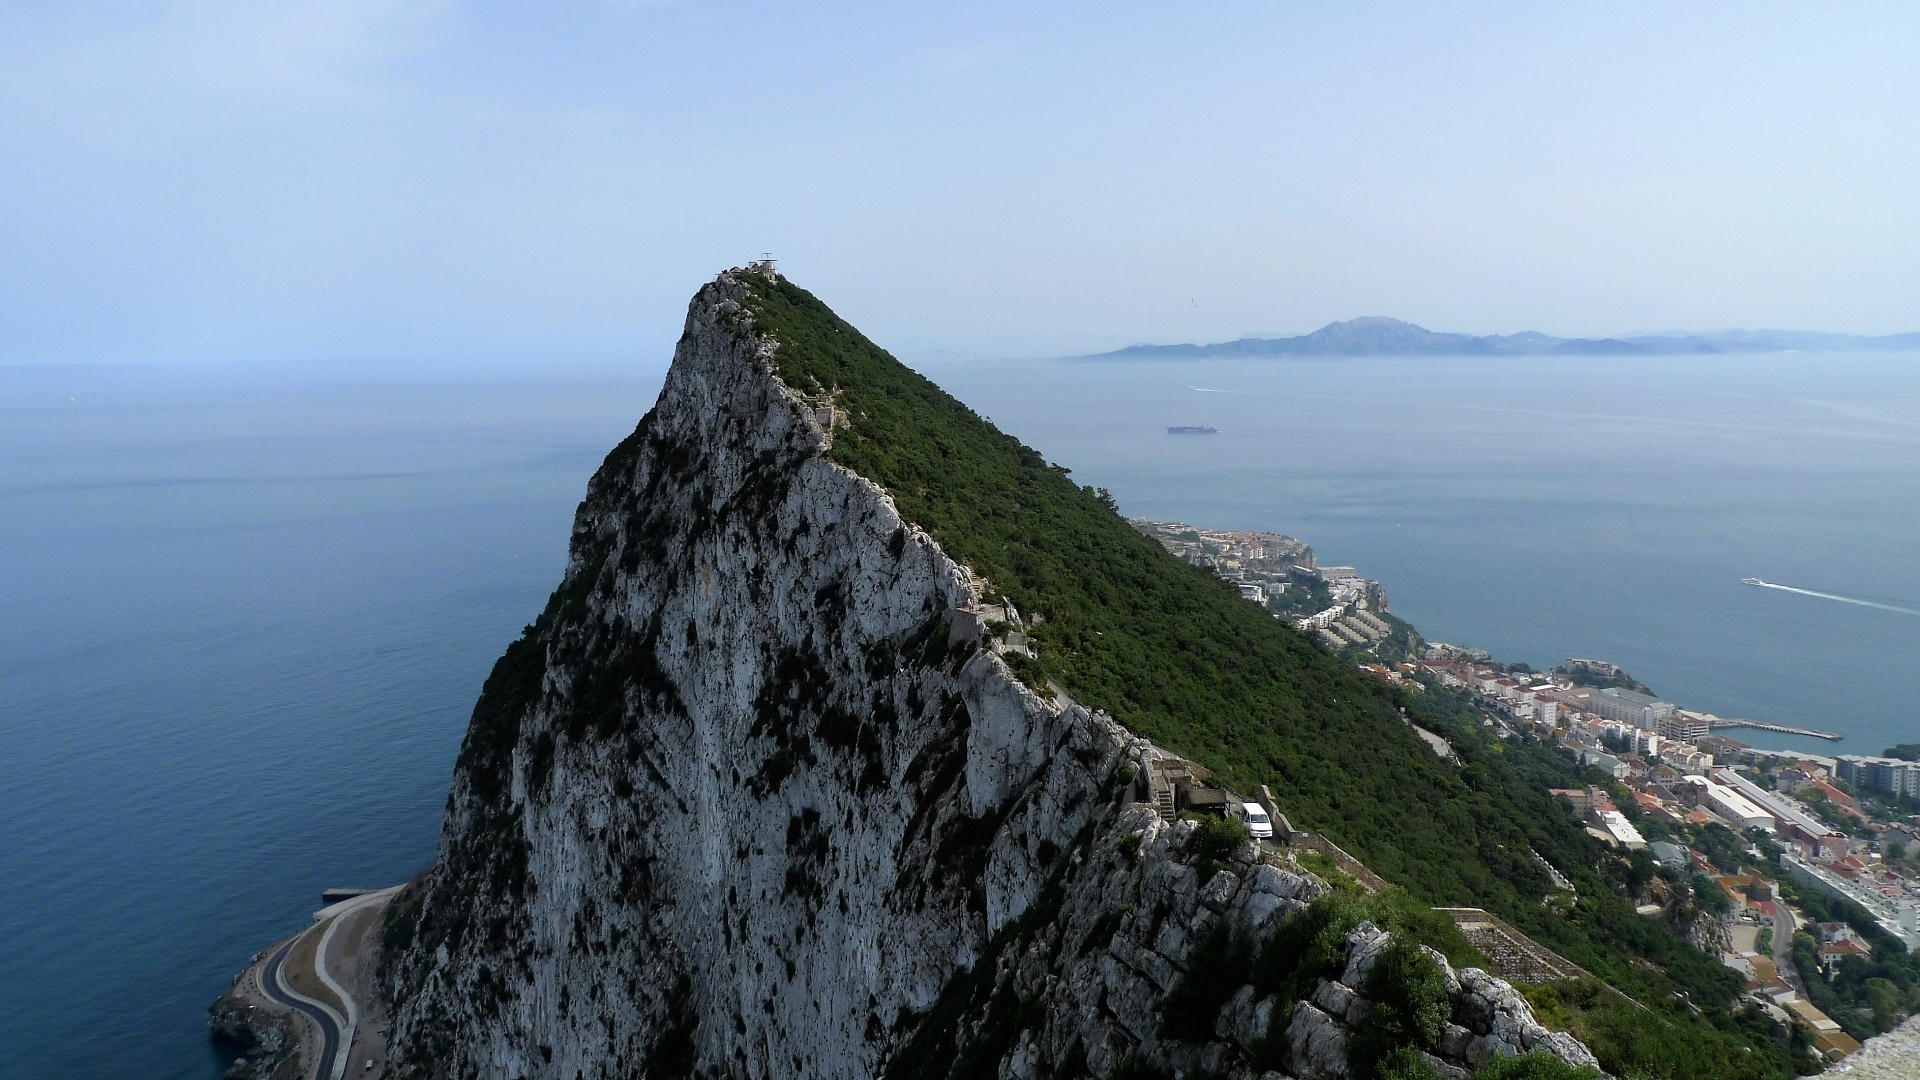 Africa from Gibraltar, Striking wallpaper, Backiee collection, Exotic destination, 1920x1080 Full HD Desktop